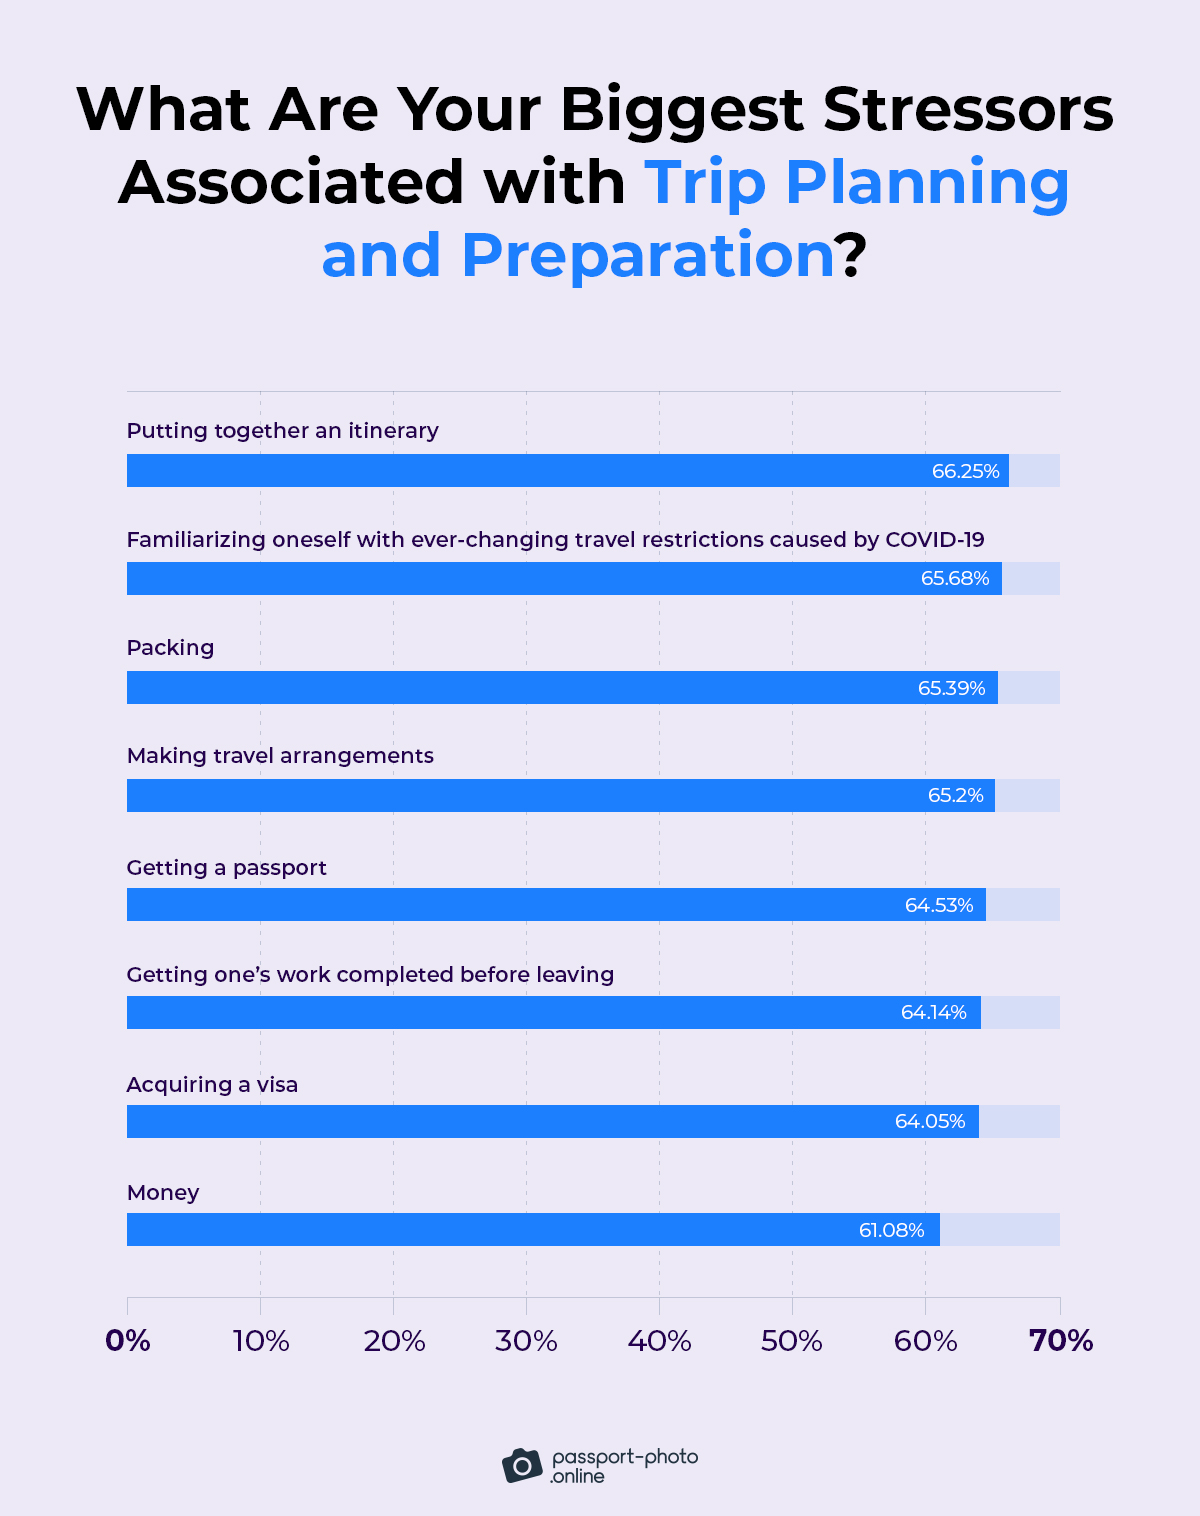 putting together an itinerary is the most stressful (66%) pre-travel activity